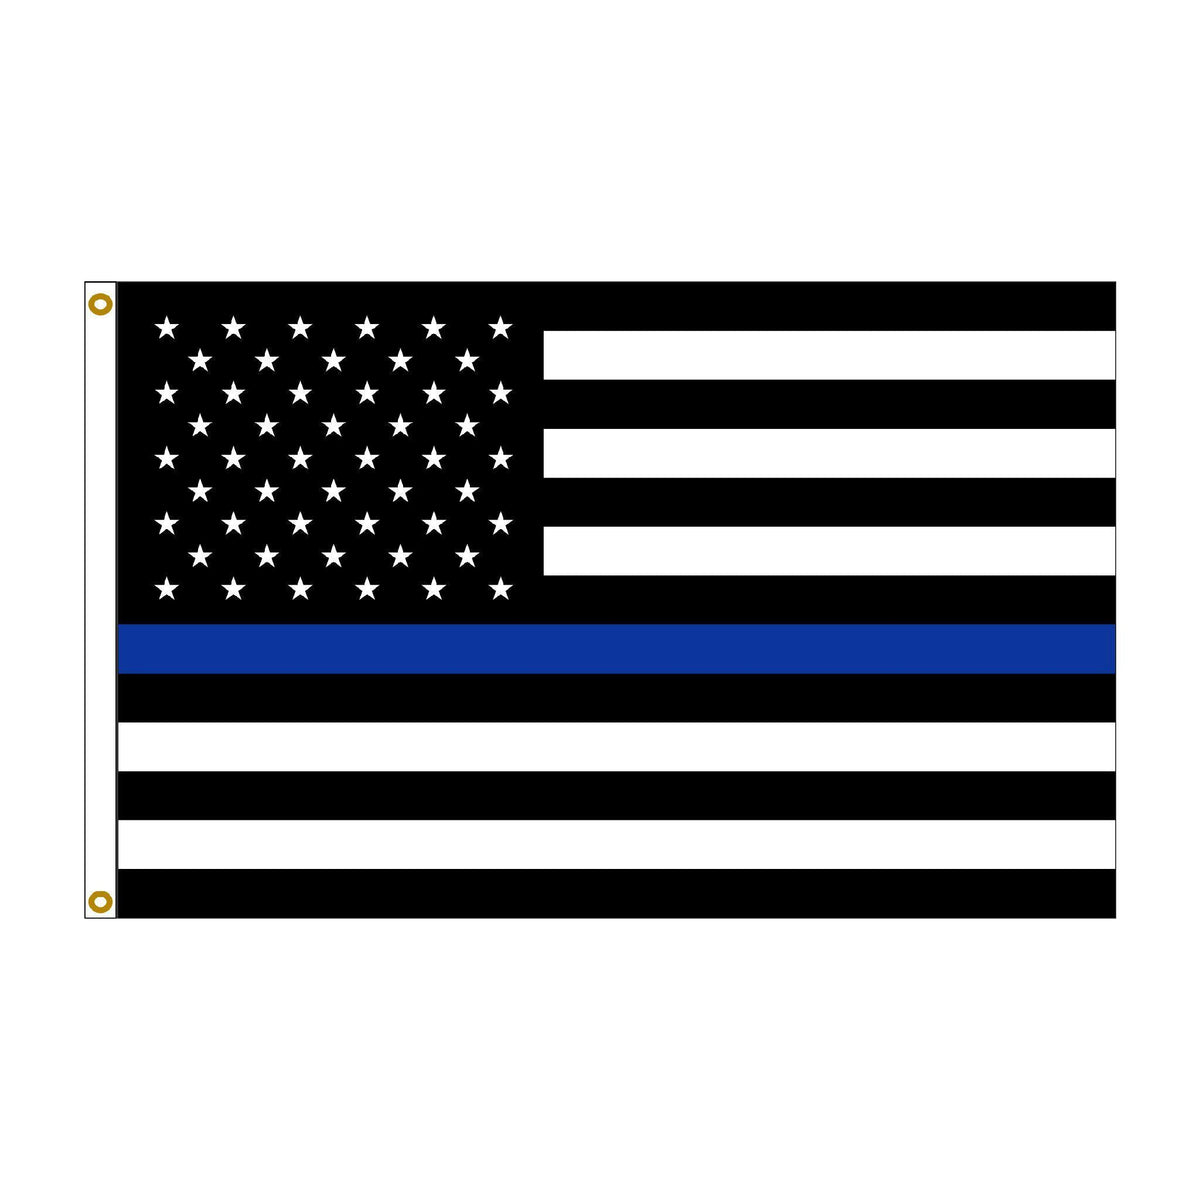 U.S. Thin Blue Line 4x6 police support flags for outdoor use.